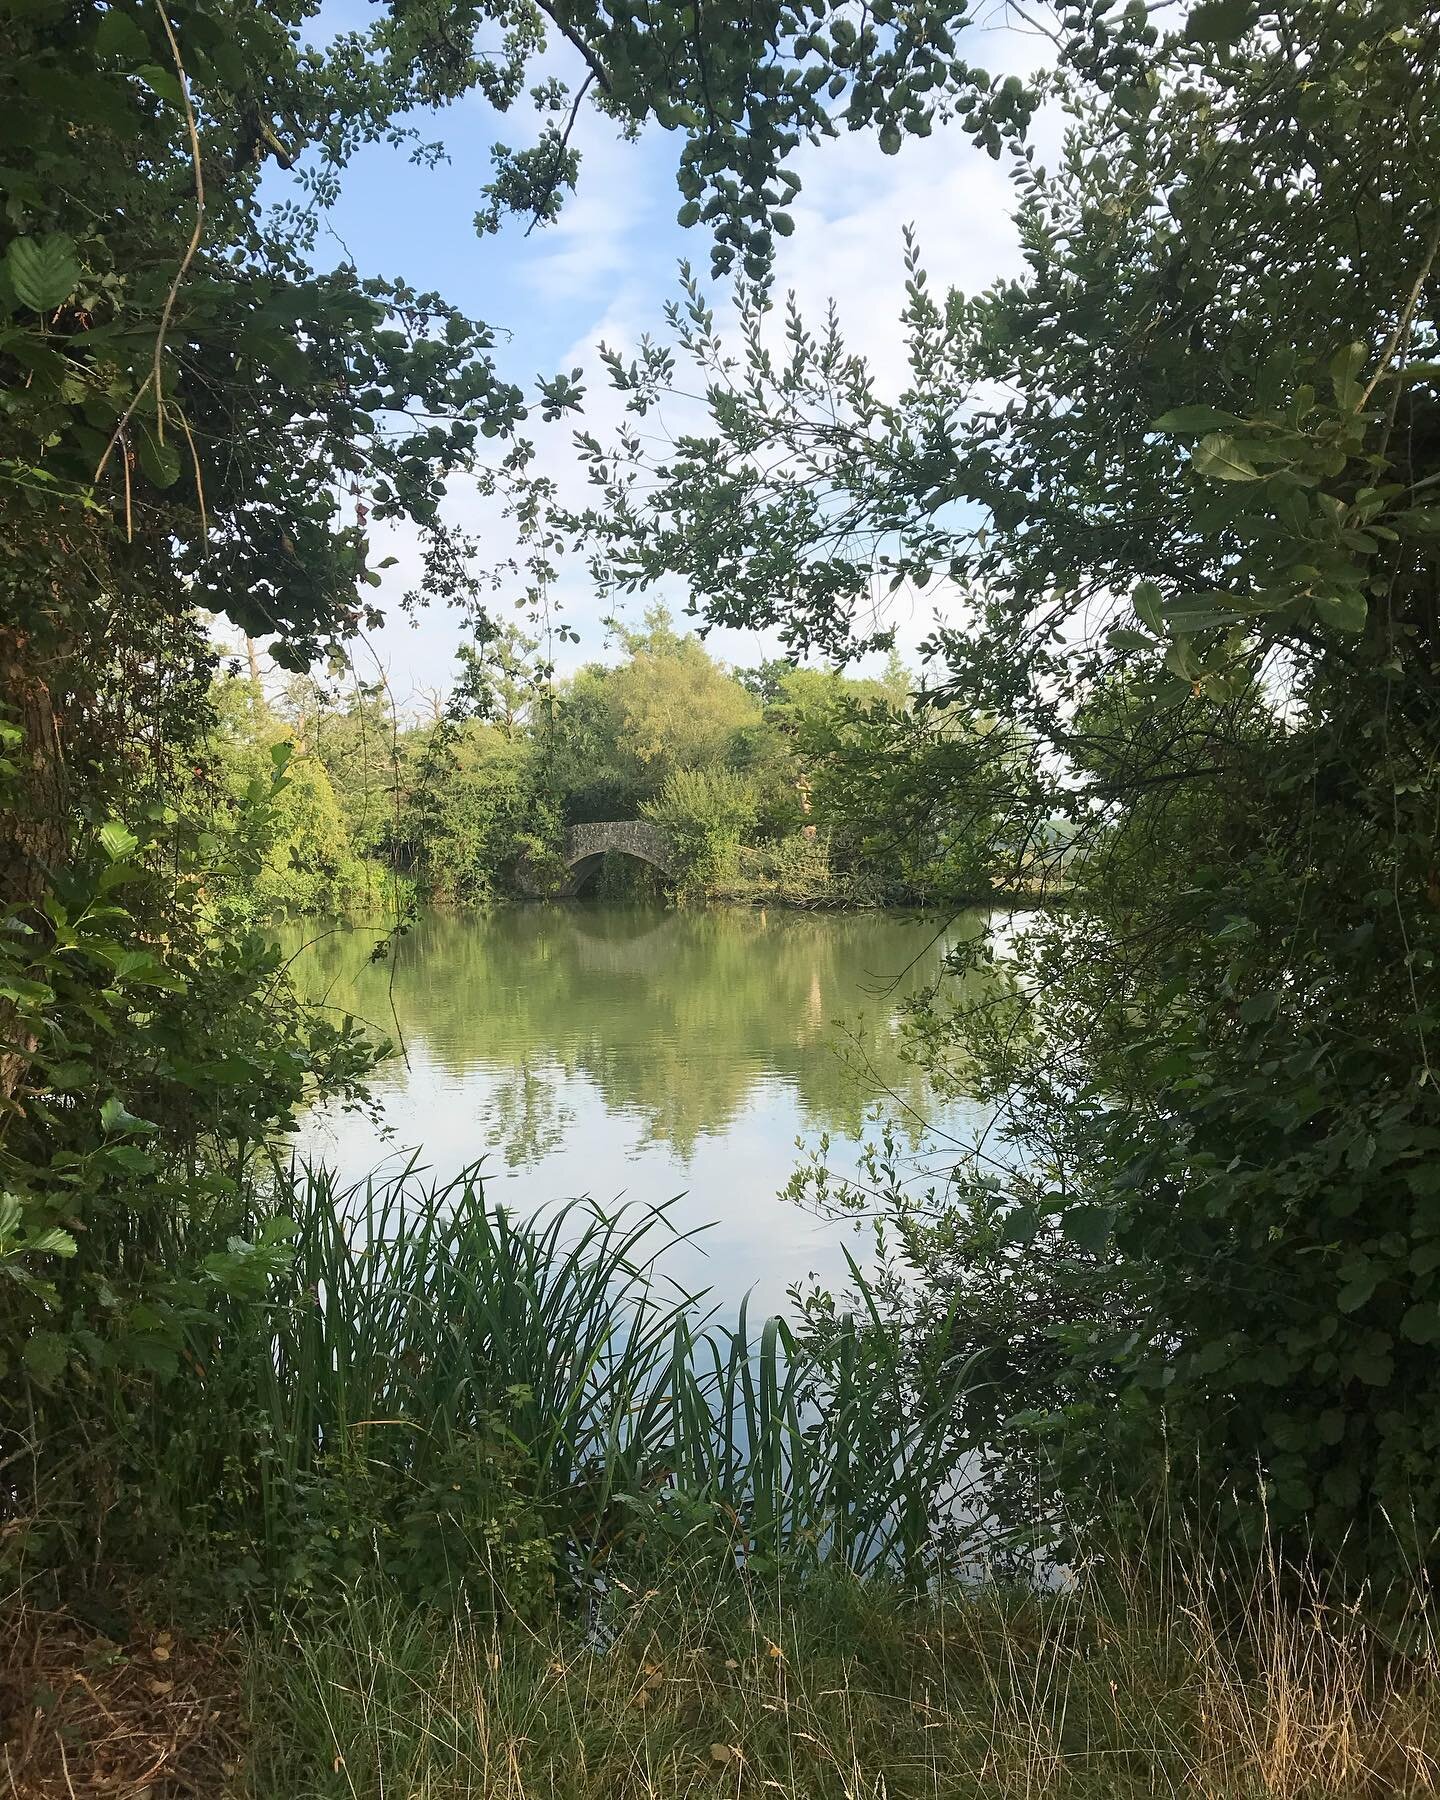 Perfect afternoon by the lake and a Kingfisher flew by! #oxonhoath #perfectday #wildplaces #yogaretreats #meditationspace #familygettogether #kentretreats #corporateevents #corporatewellness #corporateawaydays